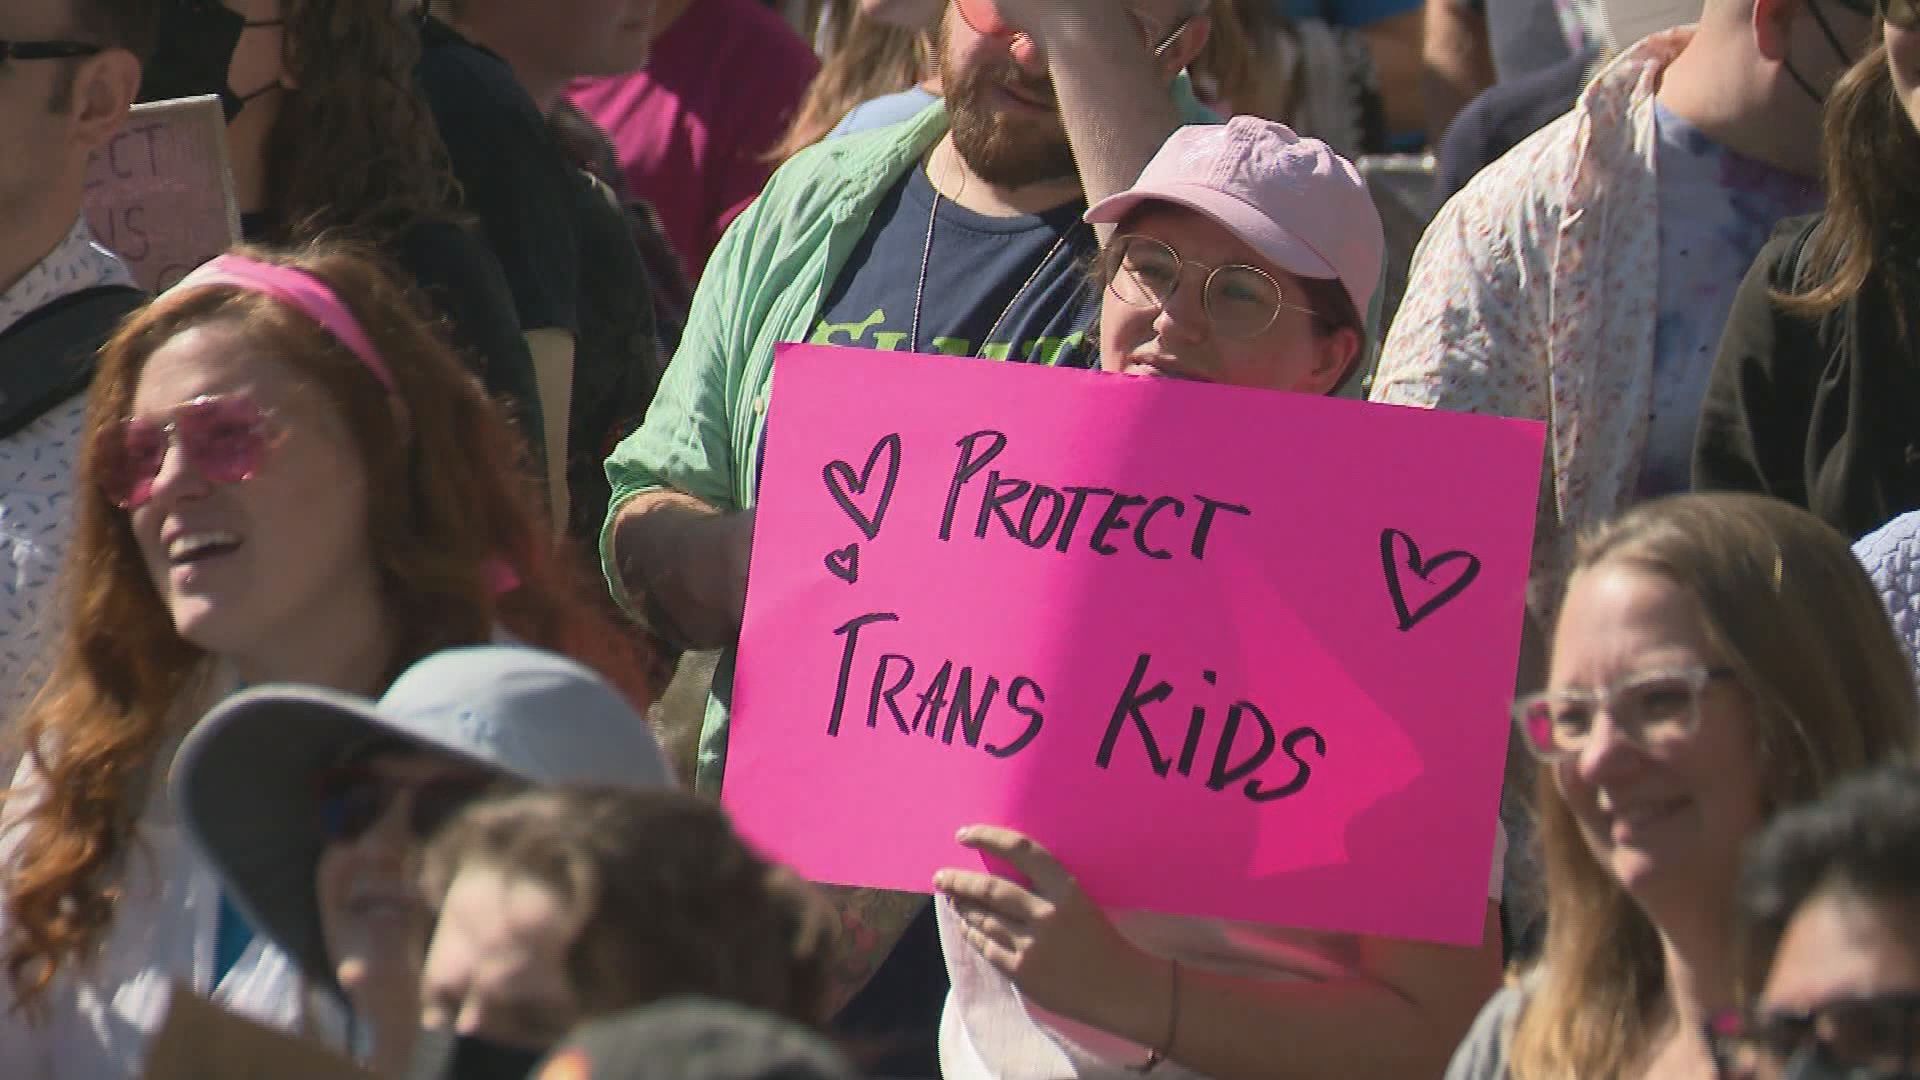 Students at McGill University in Montreal Protest Anti-Trans Speaker